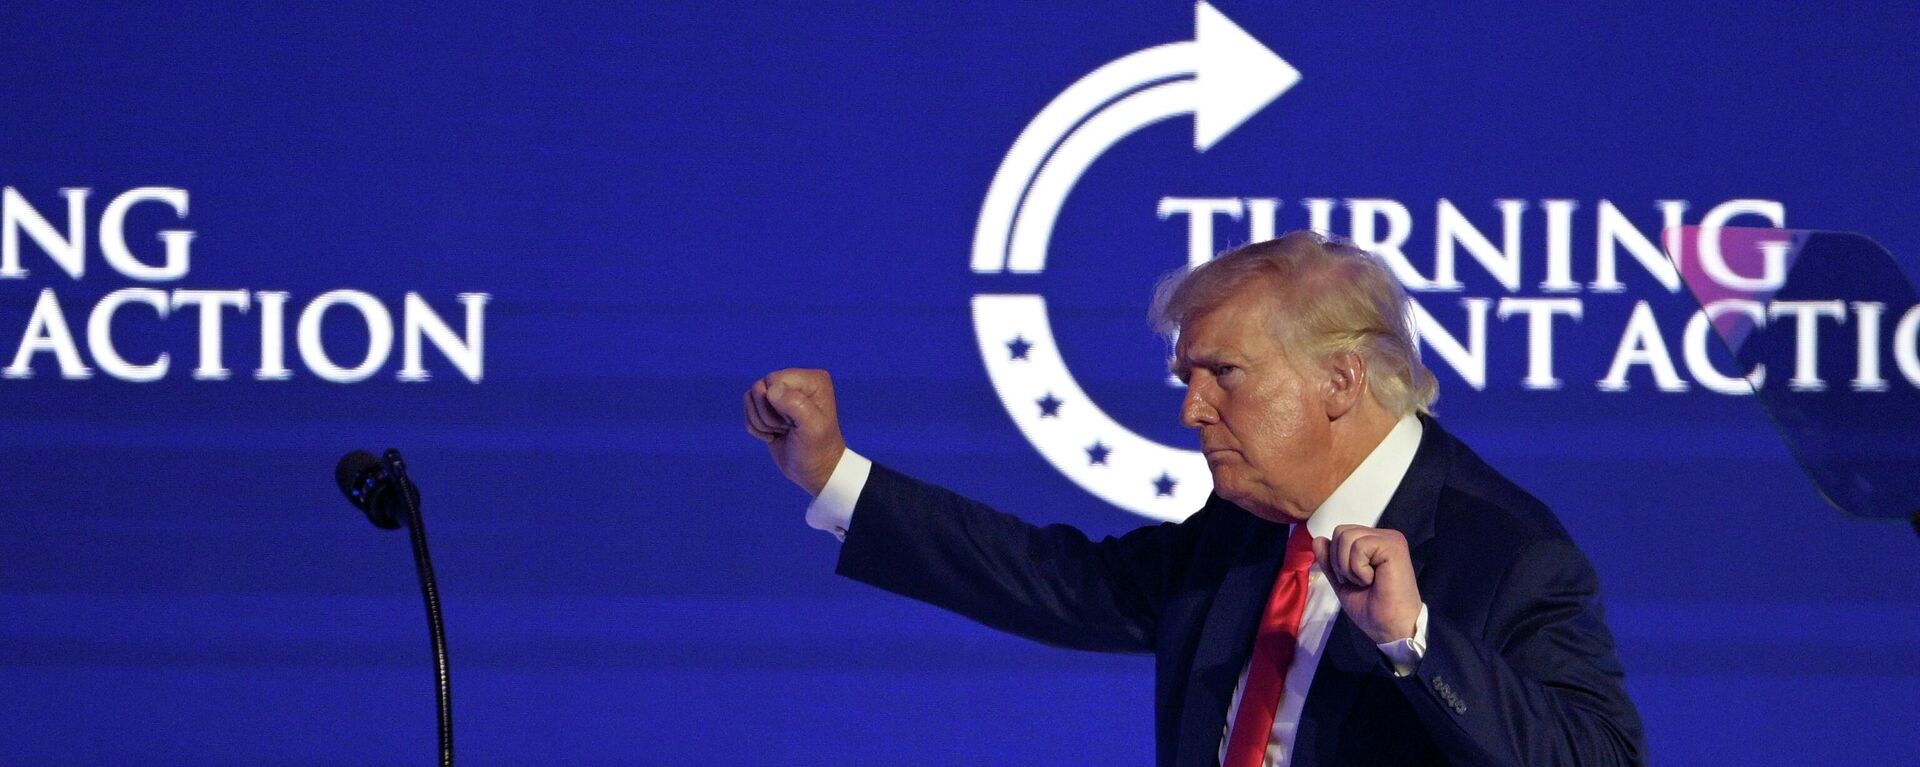 Former President Donald Trump dances on stage after addressing attendees during the Turning Point USA Student Action Summit, Saturday, July 23, 2022, in Tampa, Fla. - Sputnik International, 1920, 25.07.2022